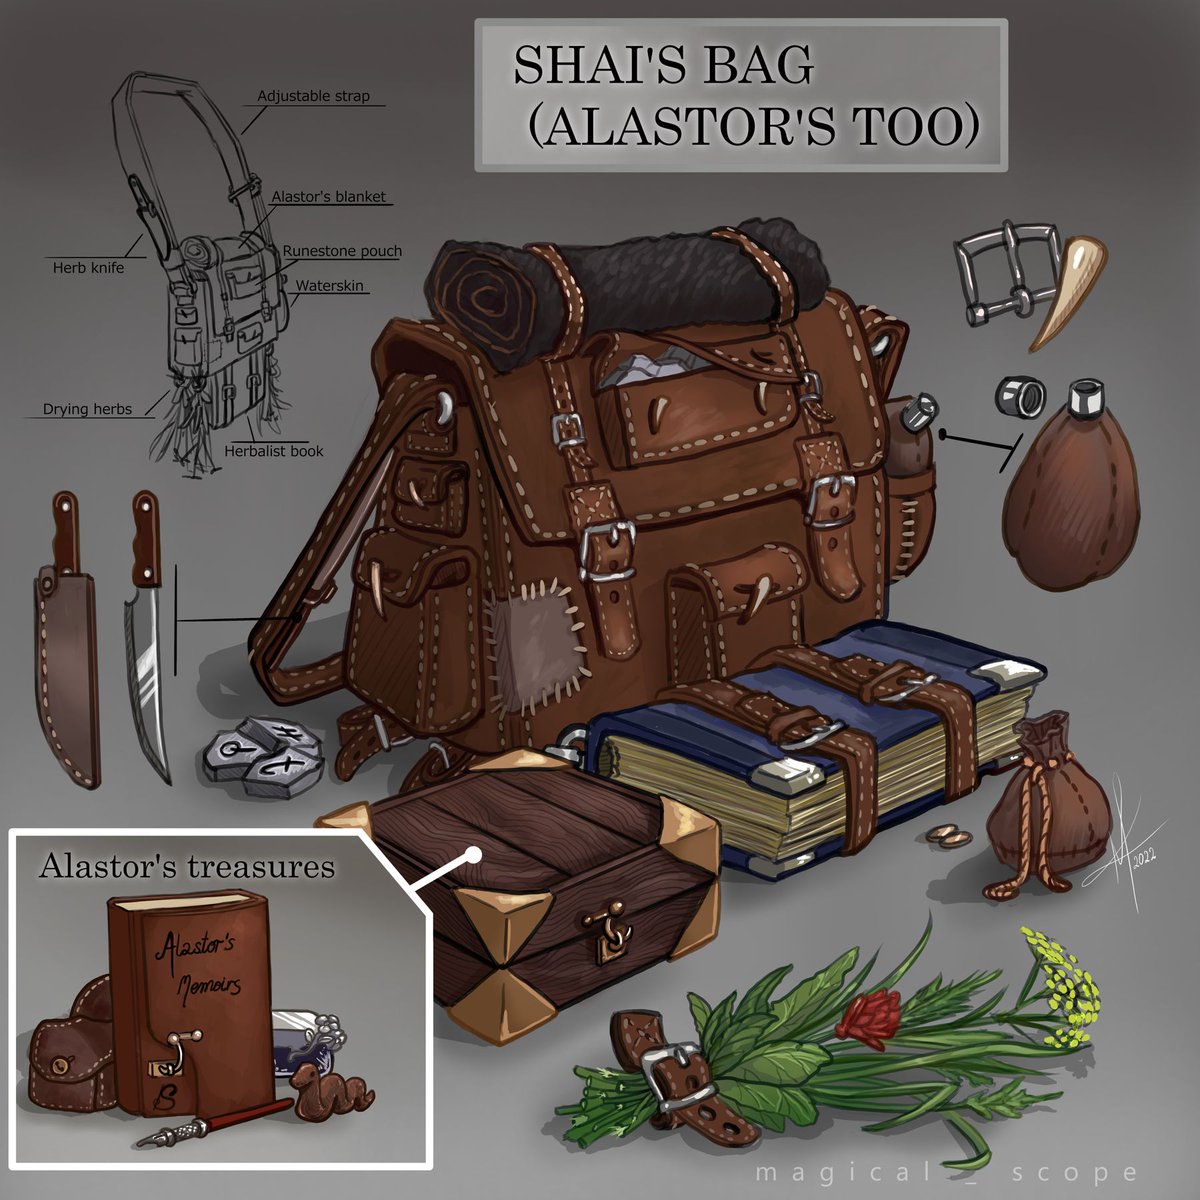 So here me out...
Bag inventory commissions.